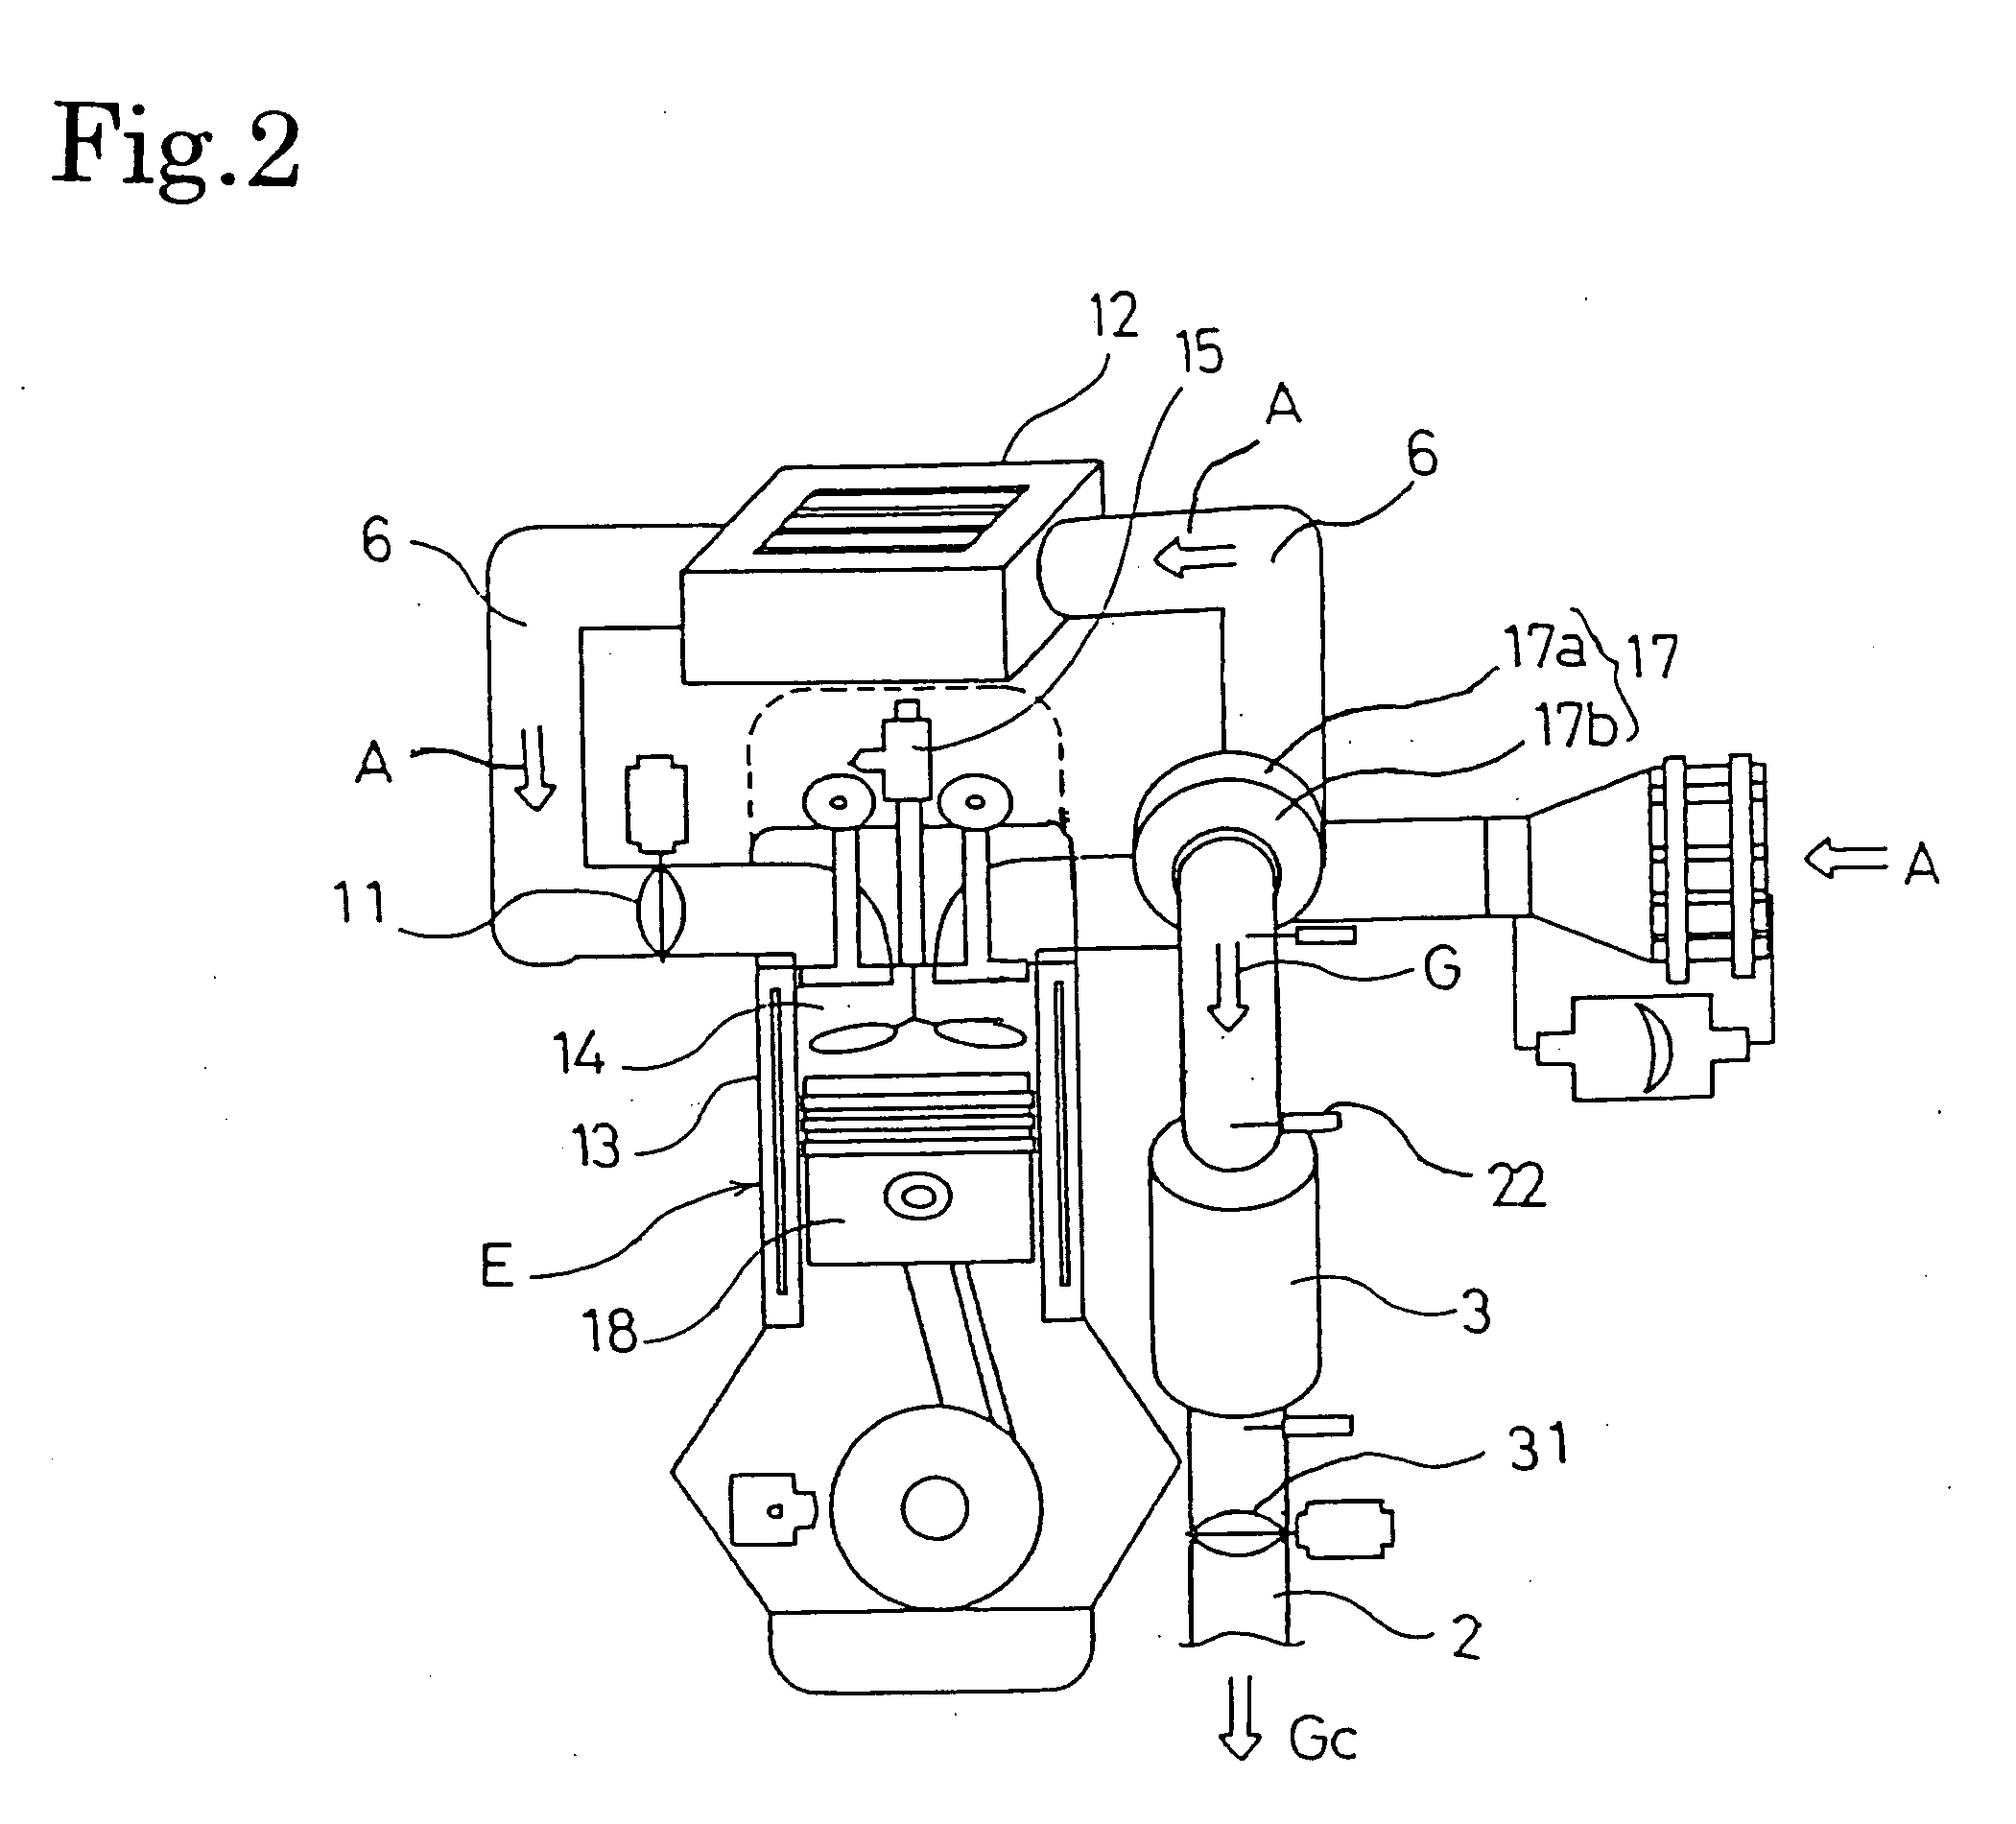 Exhaust gas purifying system